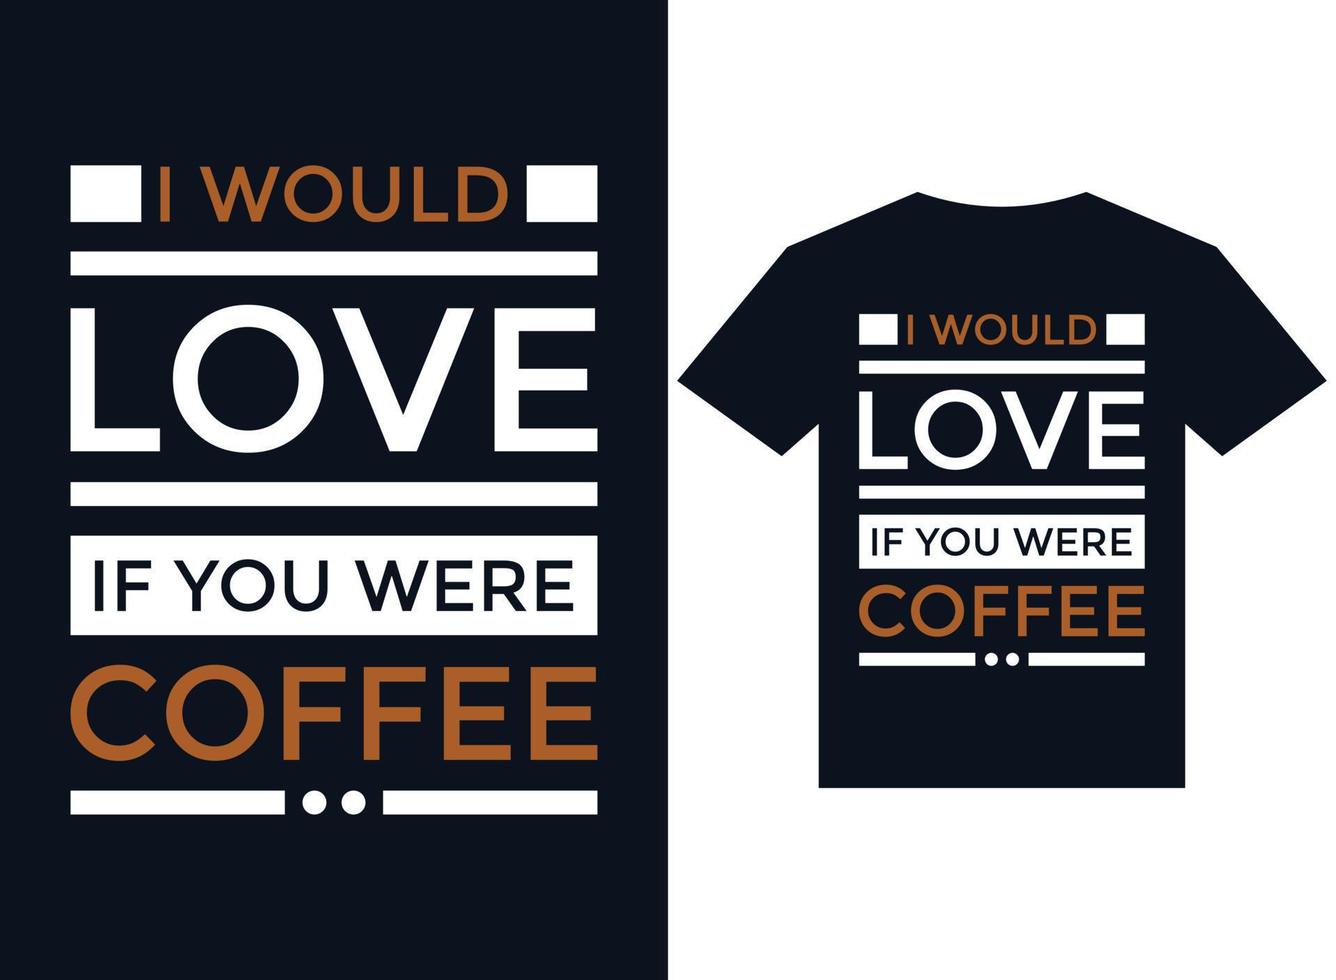 I would love if you were coffee t-shirt design typography vector illustration files for printing ready